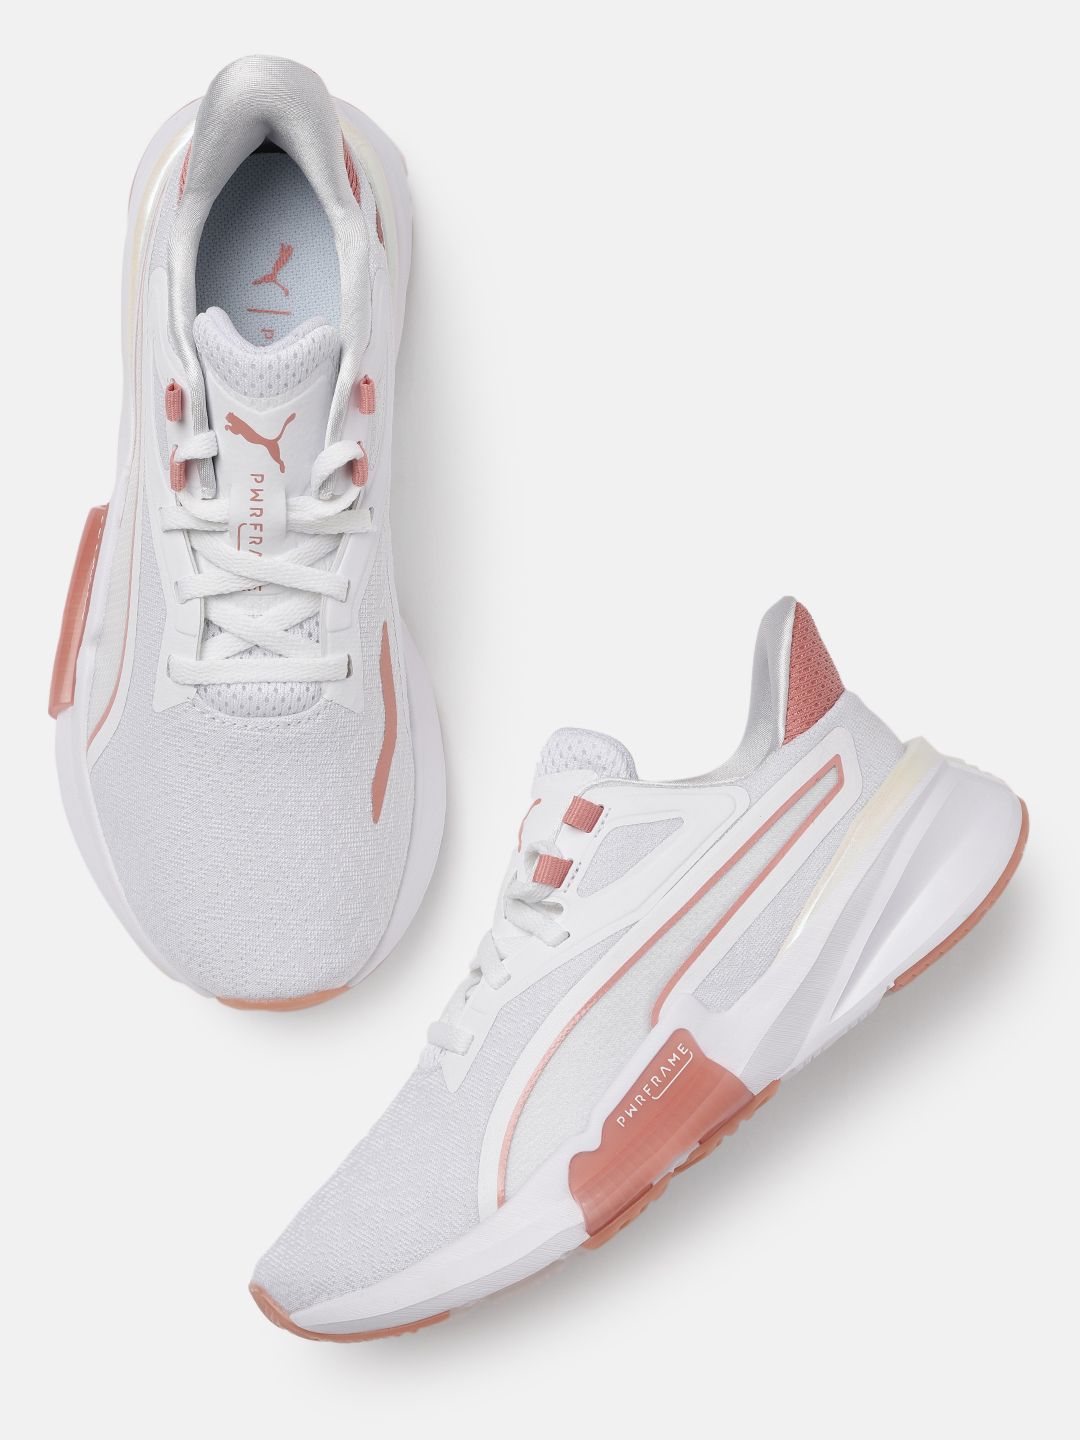 Puma Women White Textile Training or Gym Shoes Price in India